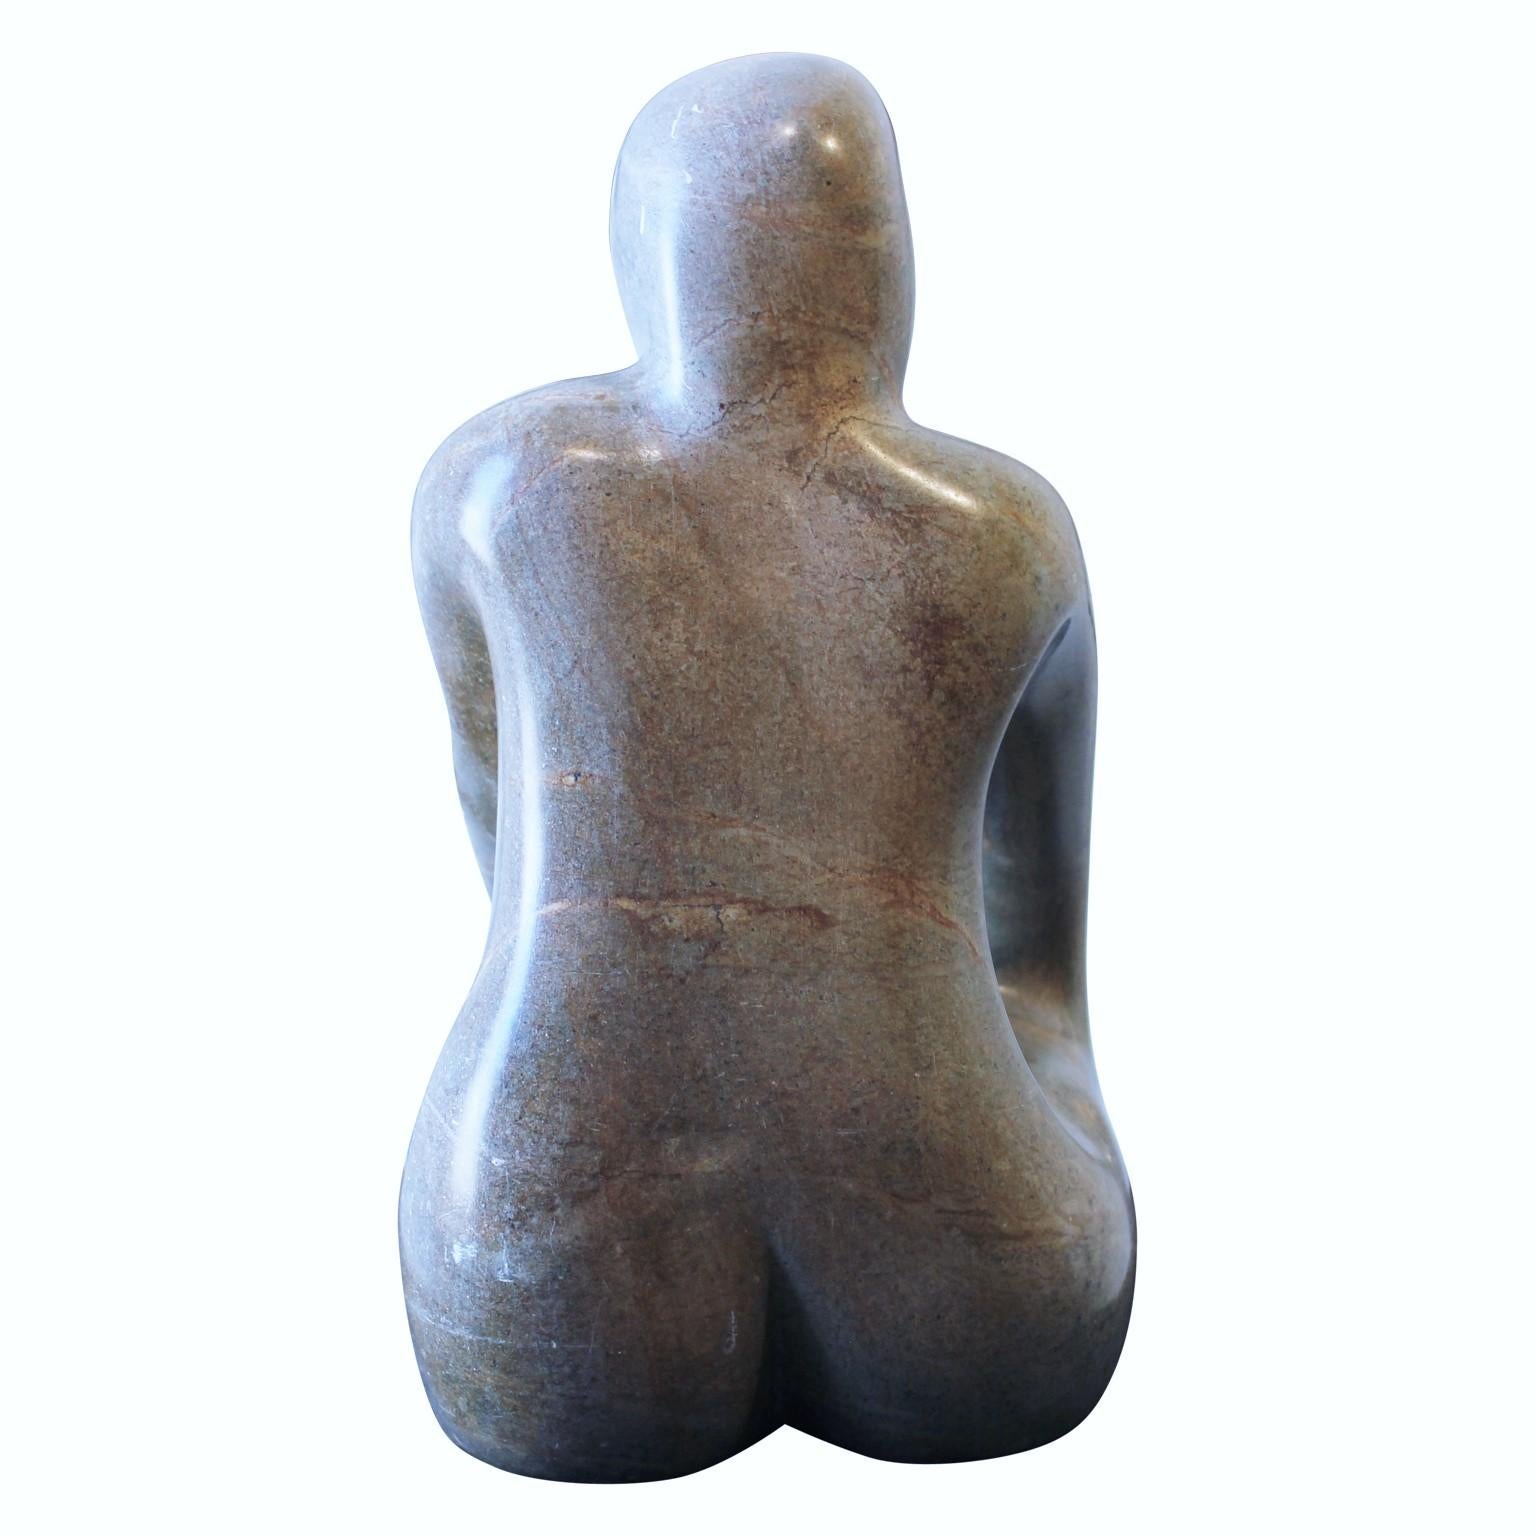 Seated Woman Stone Sculpture  - Gray Figurative Sculpture by Luiz C. Faustino